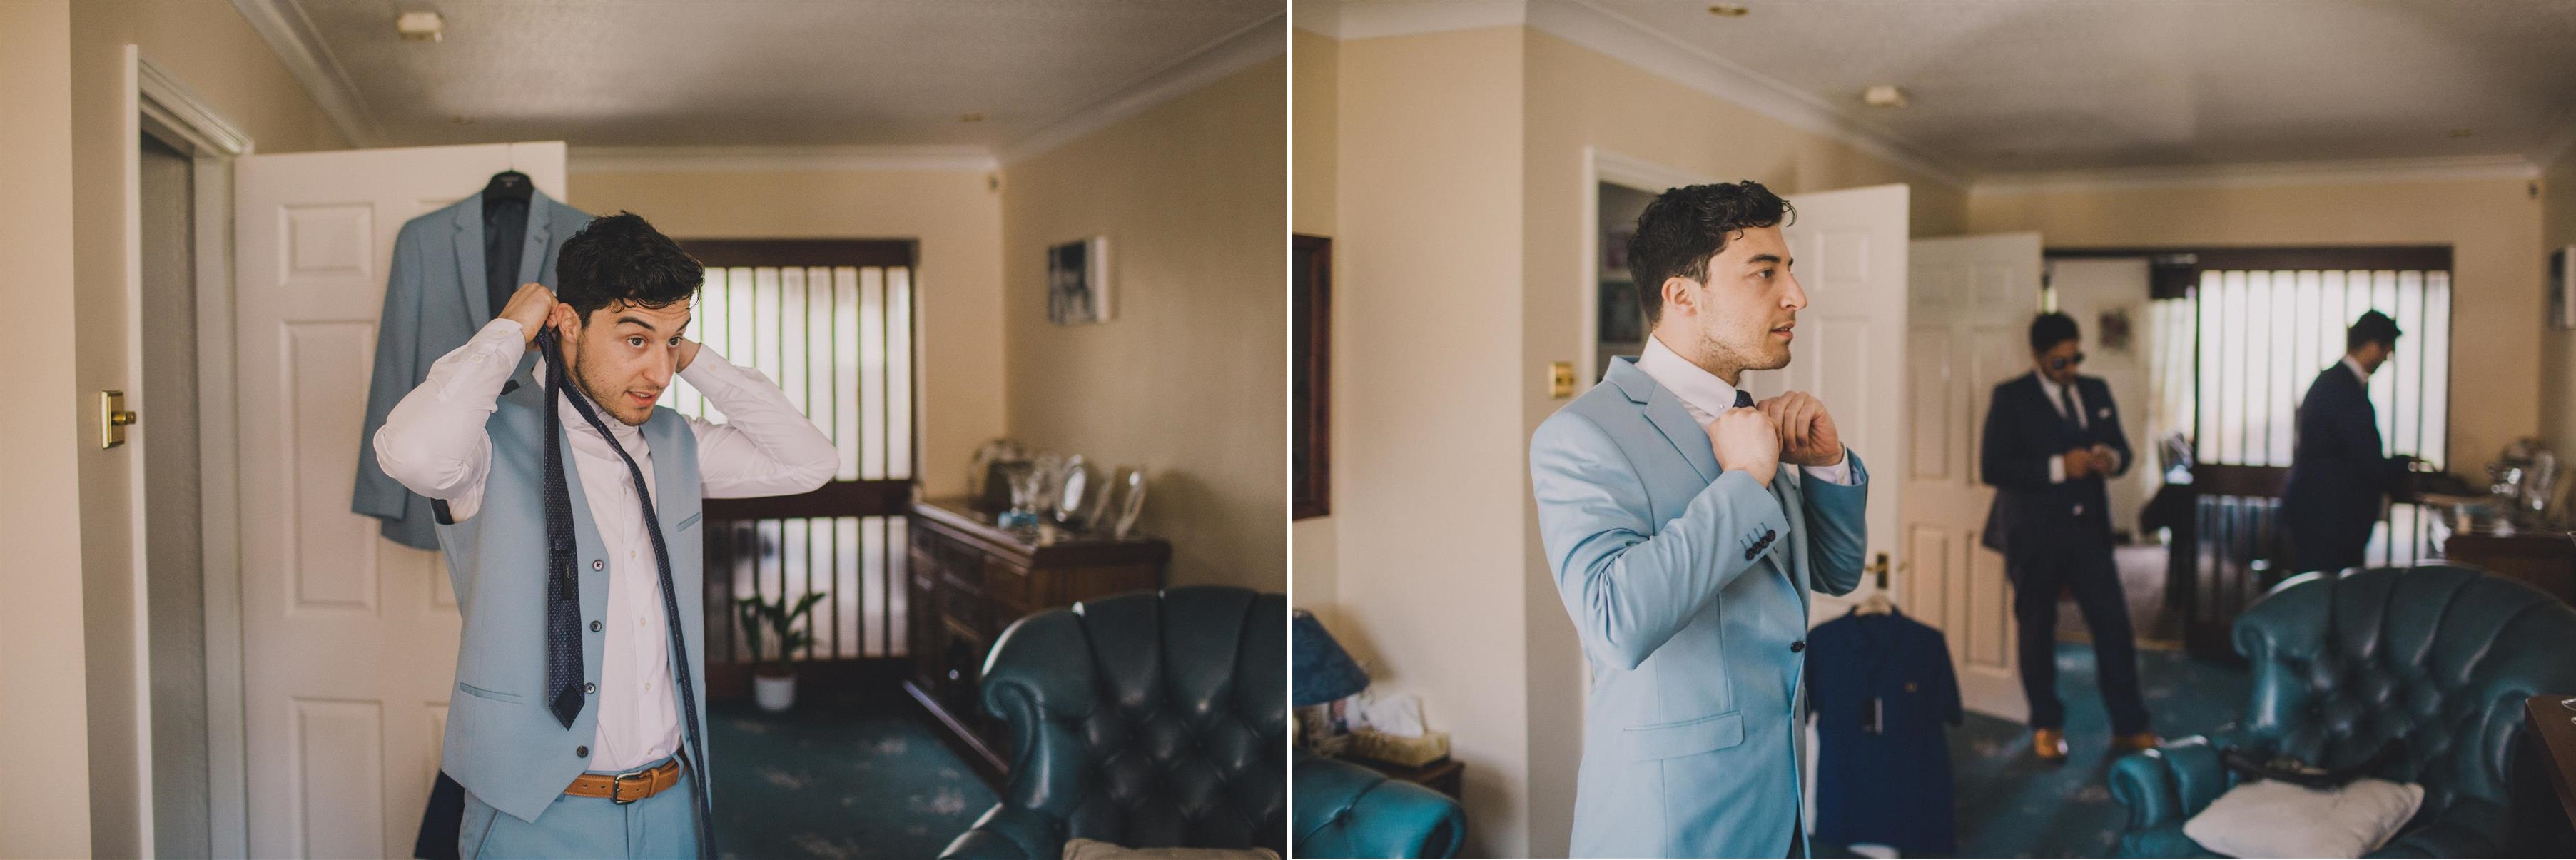 Groom Getting Readt - A Spring 1960s Inspired Wedding